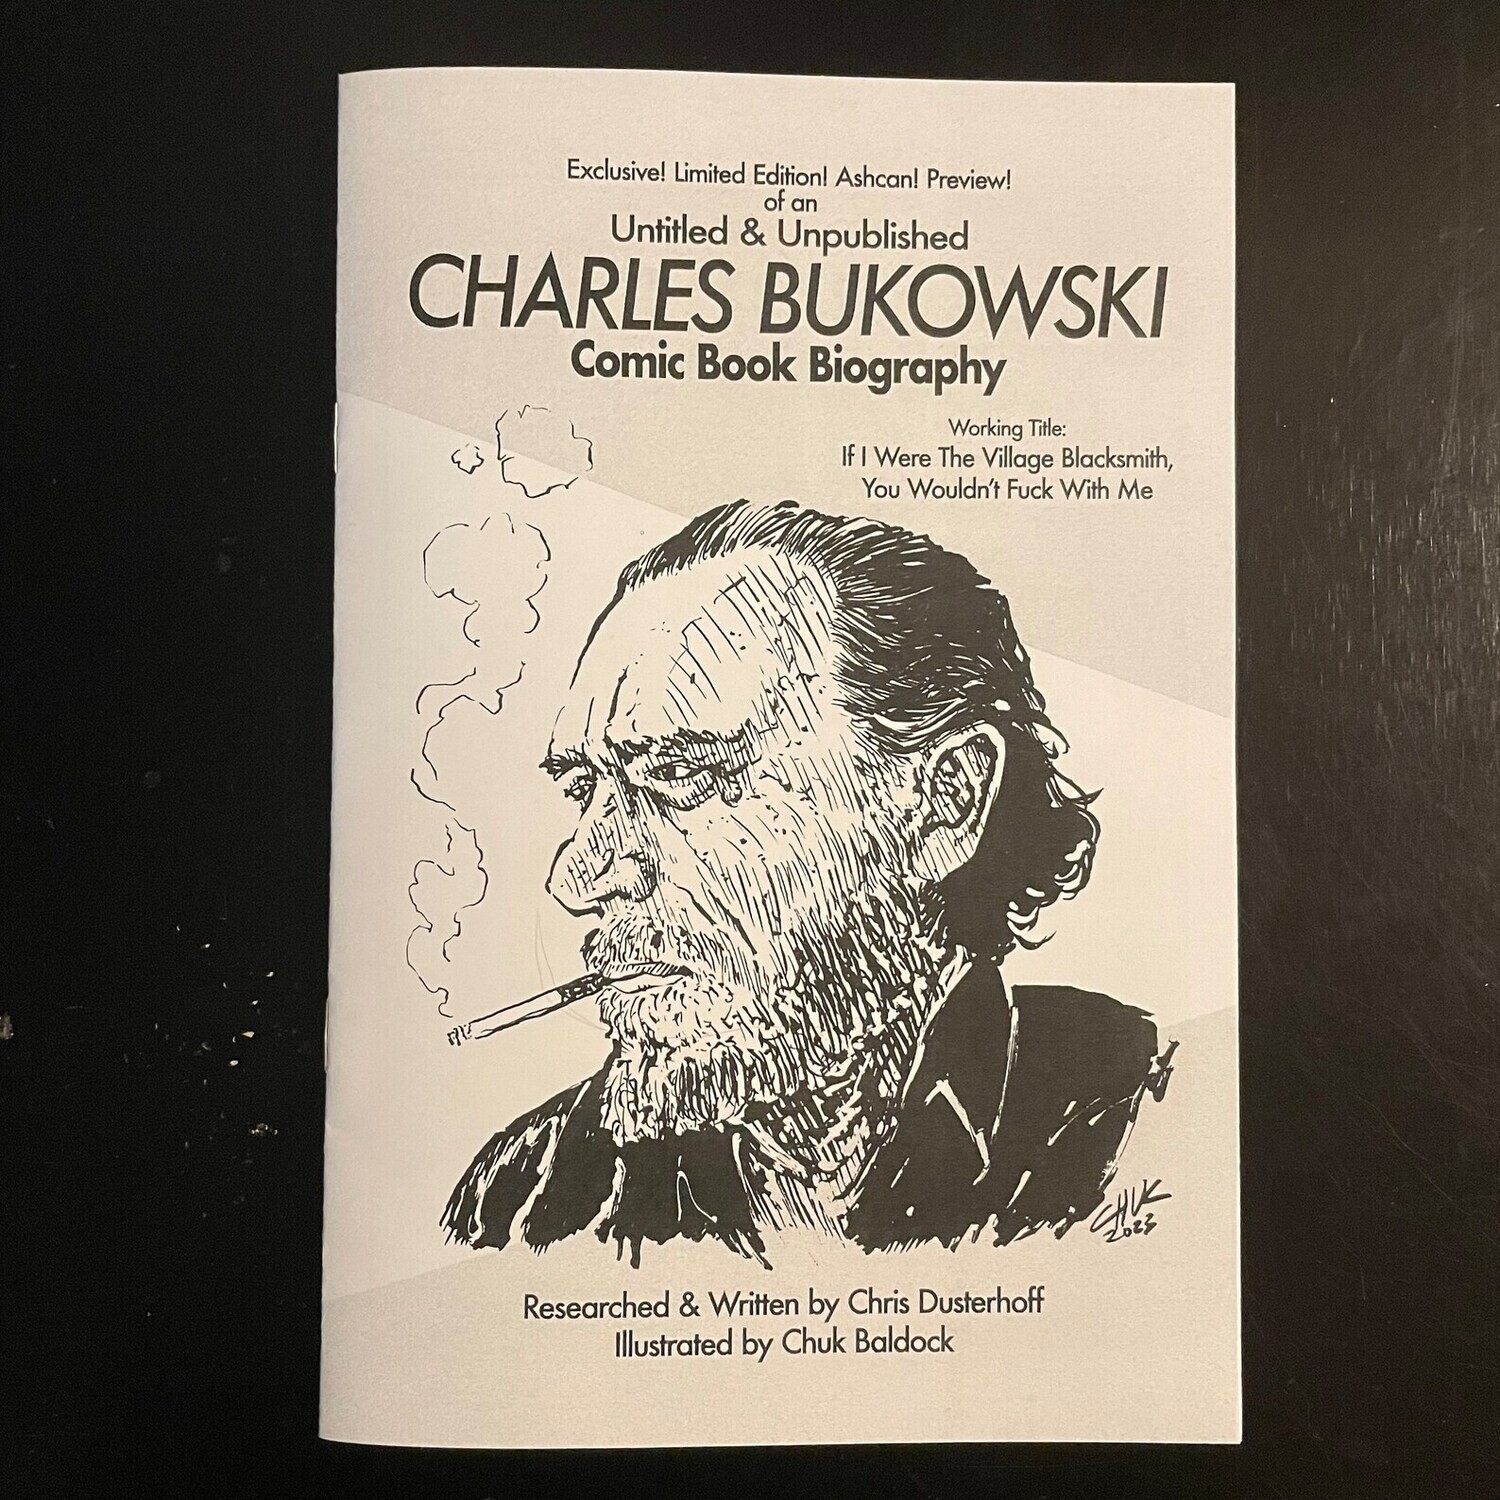 Untitled and Unpublished Charles Bukowski Comic Book Biography, by Chris Dusterhoff